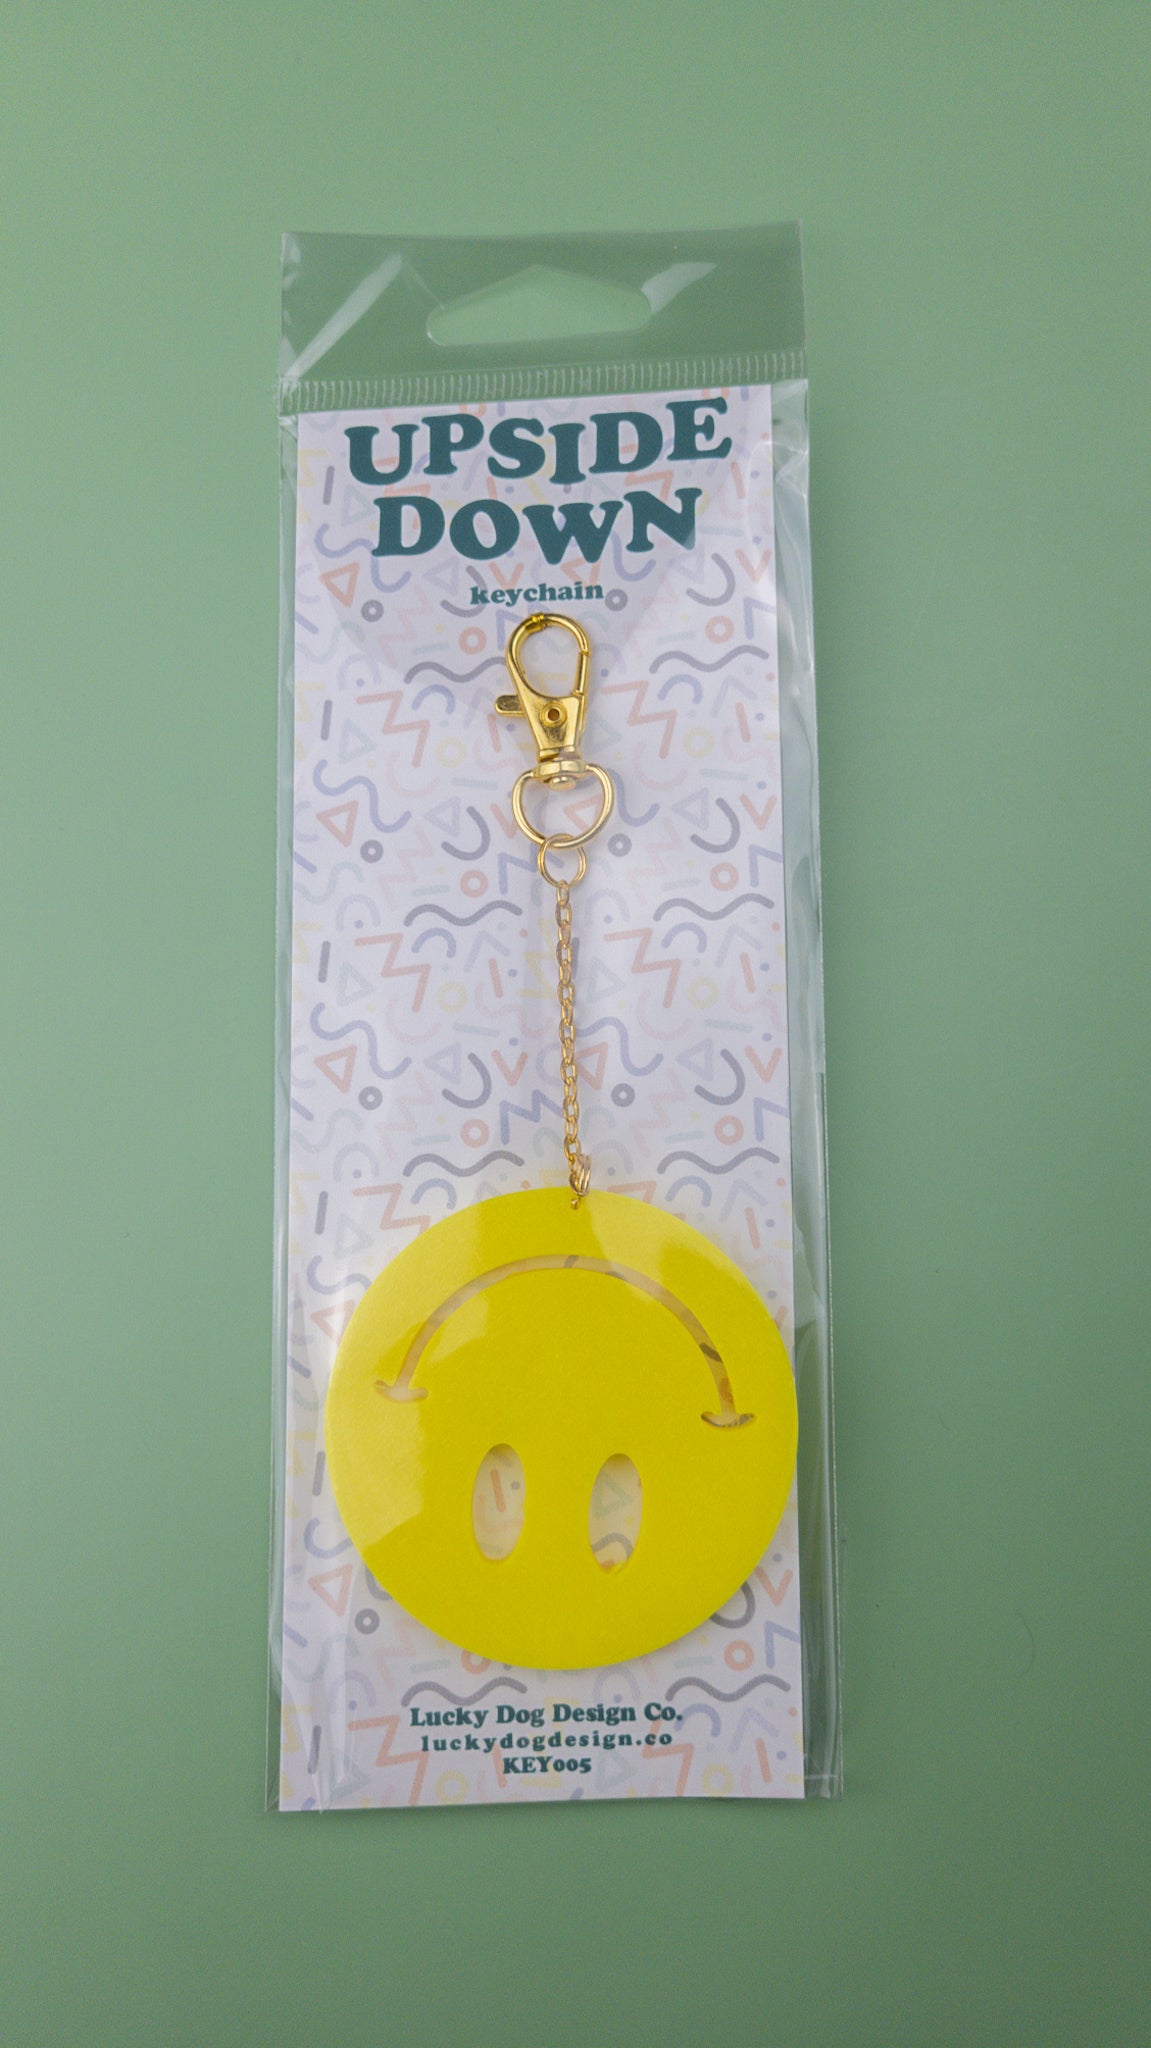 Upside Down Smiley Face Keychain